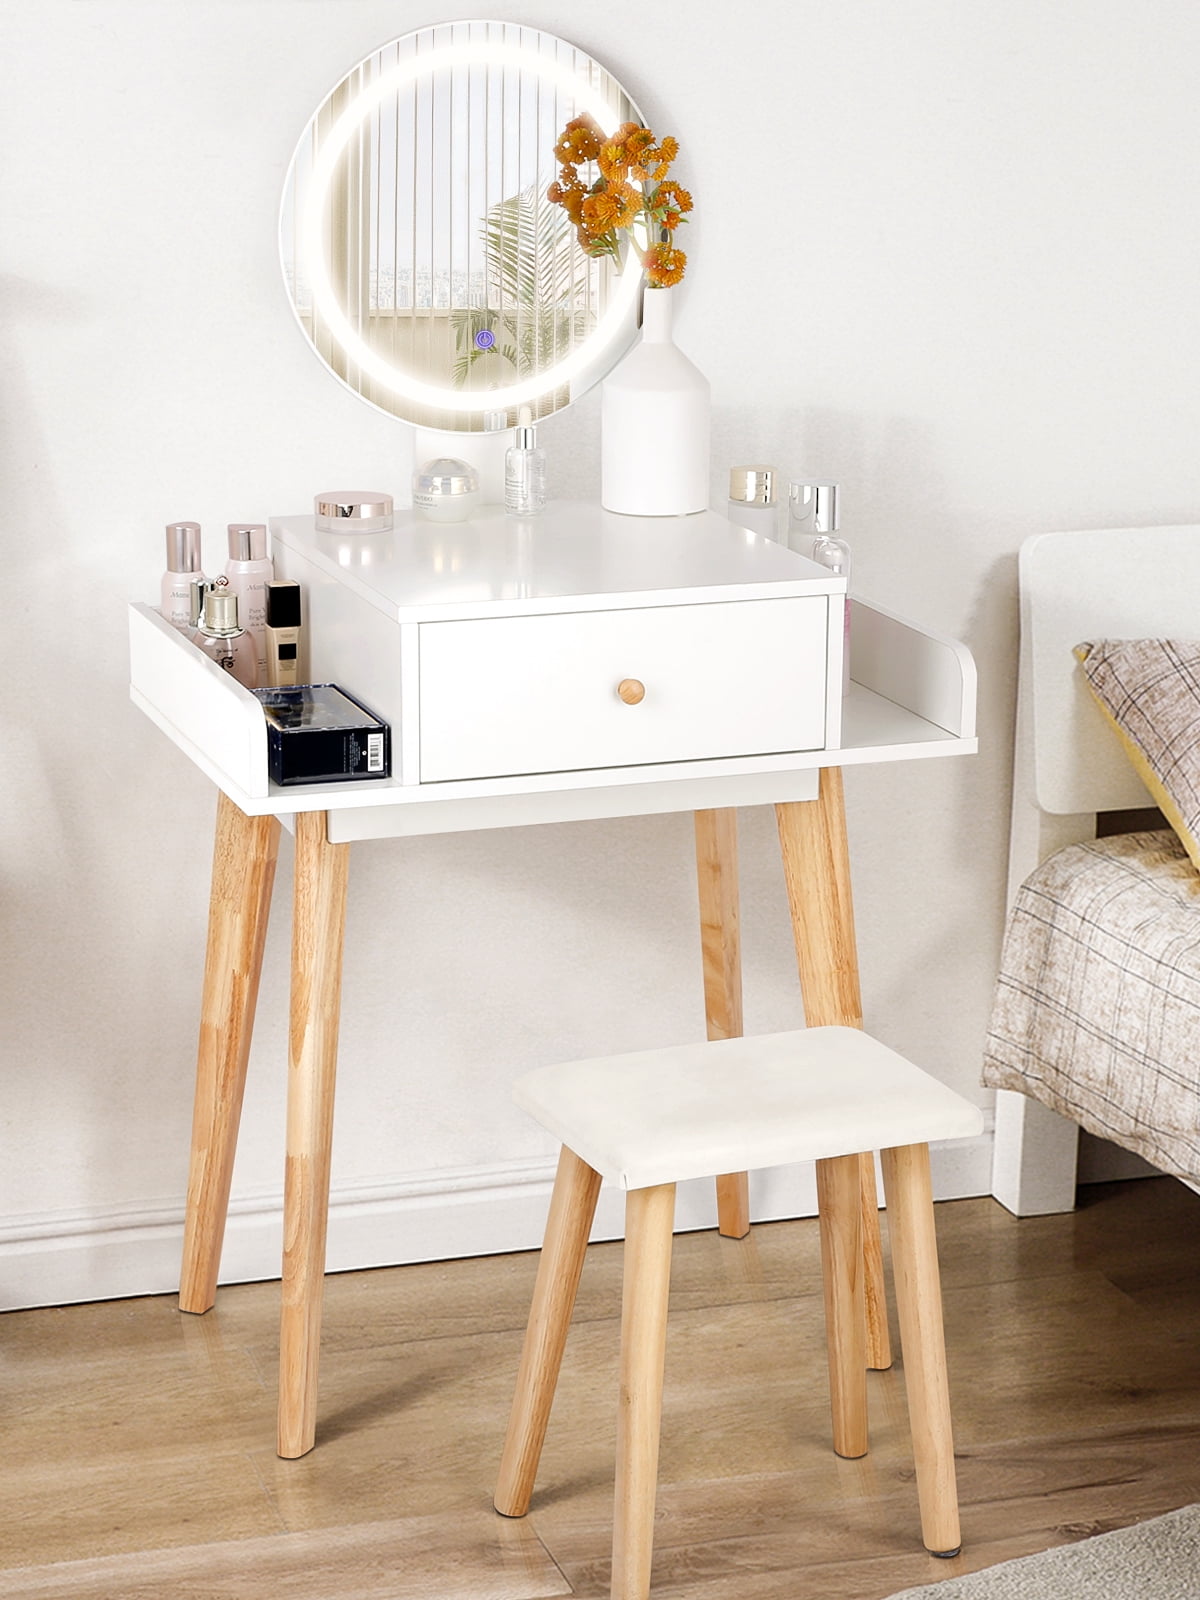 Details about   Modern Lighted Makeup Vanity Table 3 Mirrors,4 Drawers & Padded Stool White+Gold 